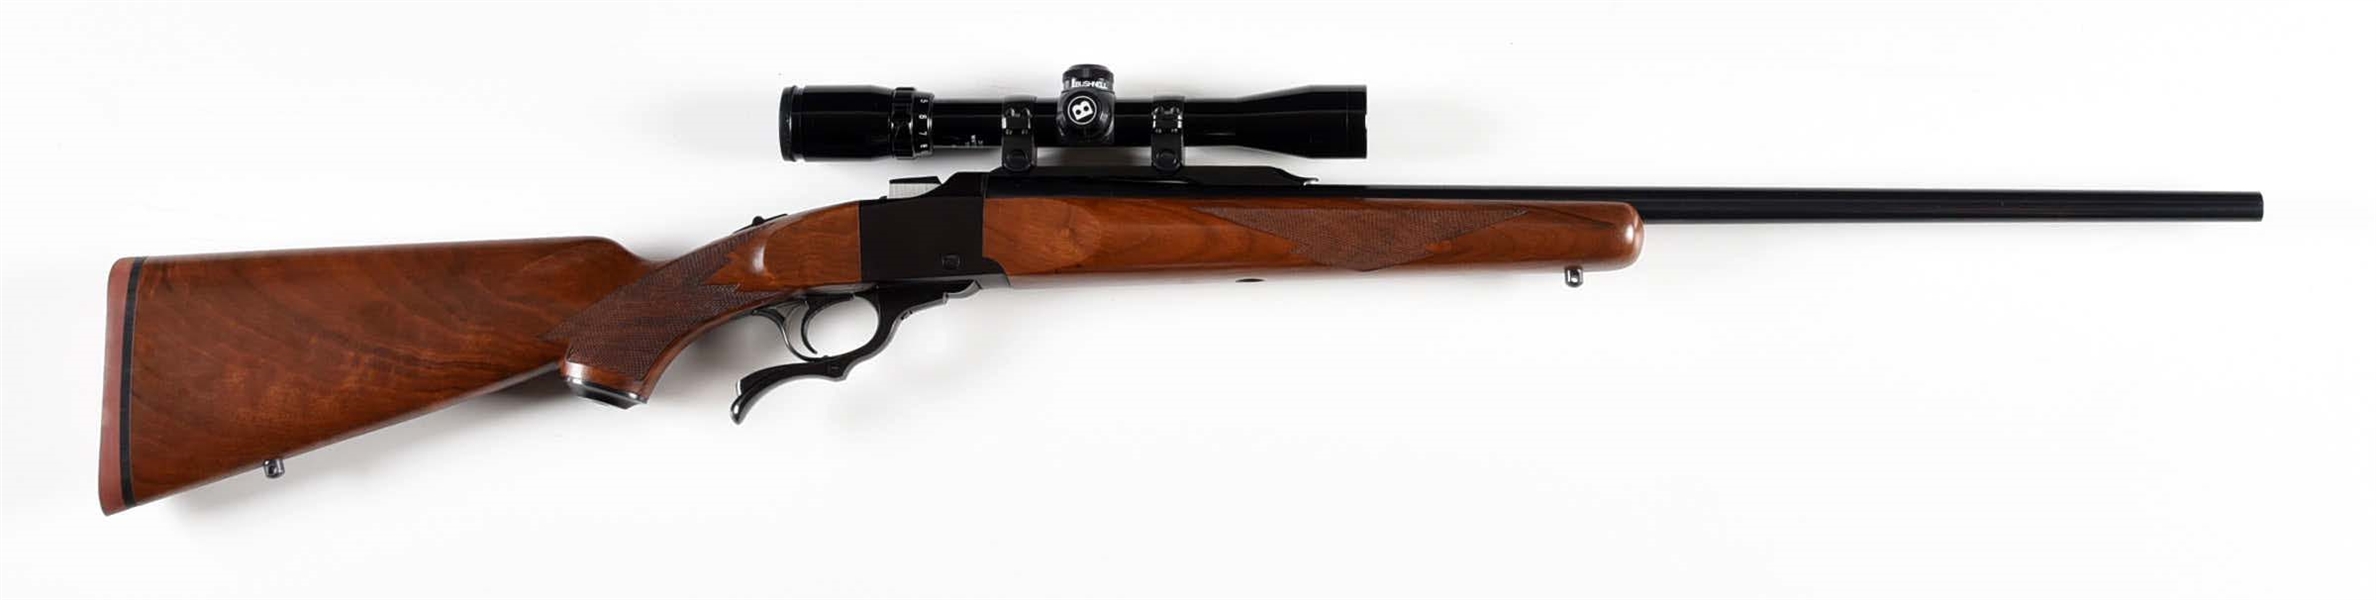 (M) RUGER NO. 1 SINGLE SHOT RIFLE IN .220 SWIFT.